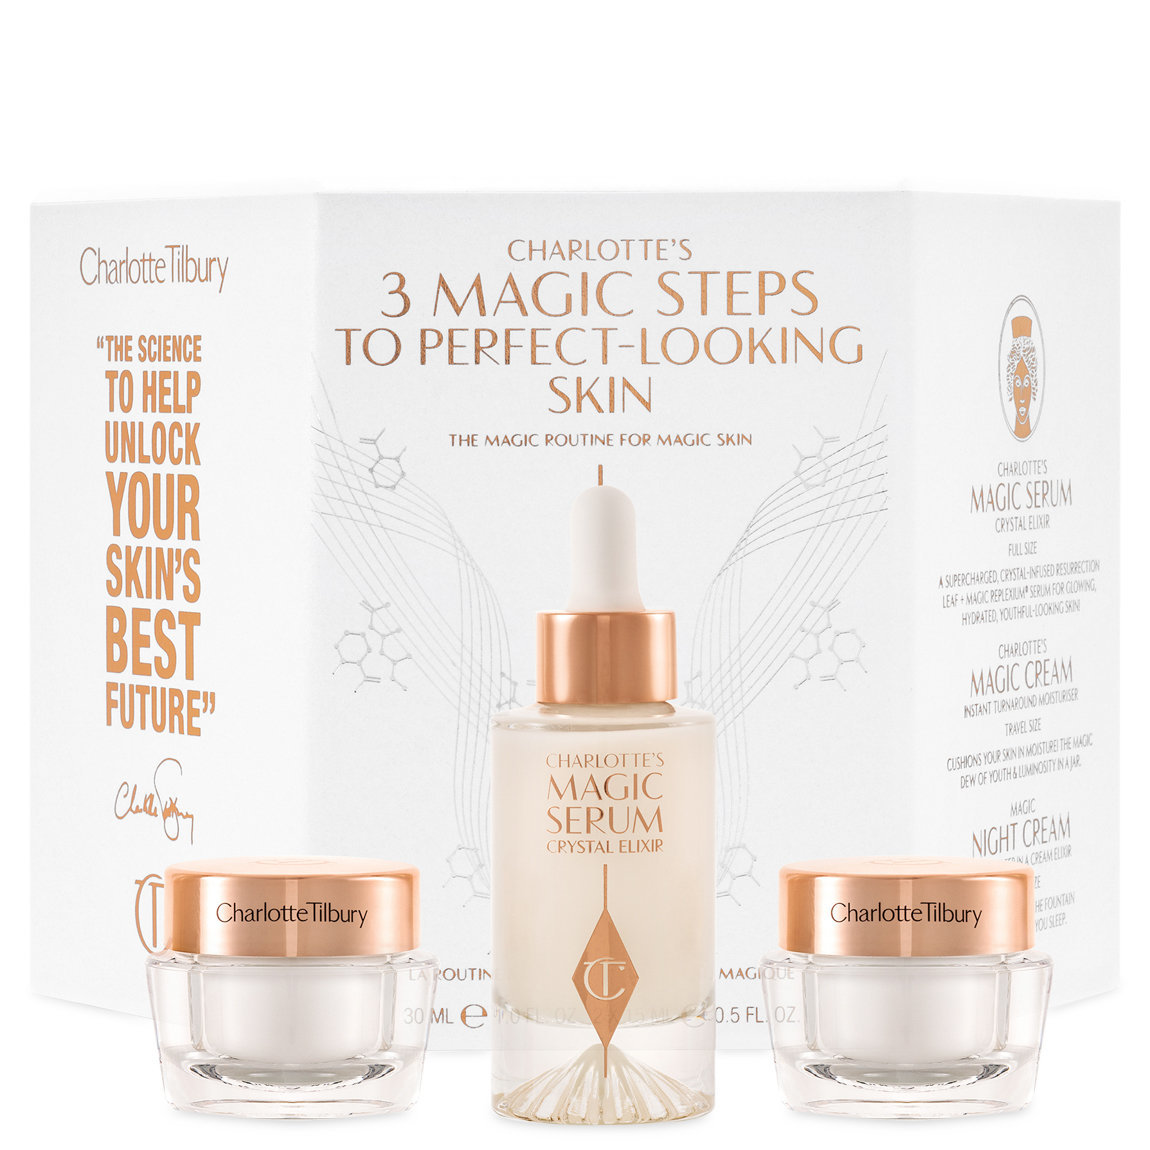 Charlotte Tilbury Charlotte's 3 Magic Steps to Perfect-Looking Skin alternative view 1 - product swatch.